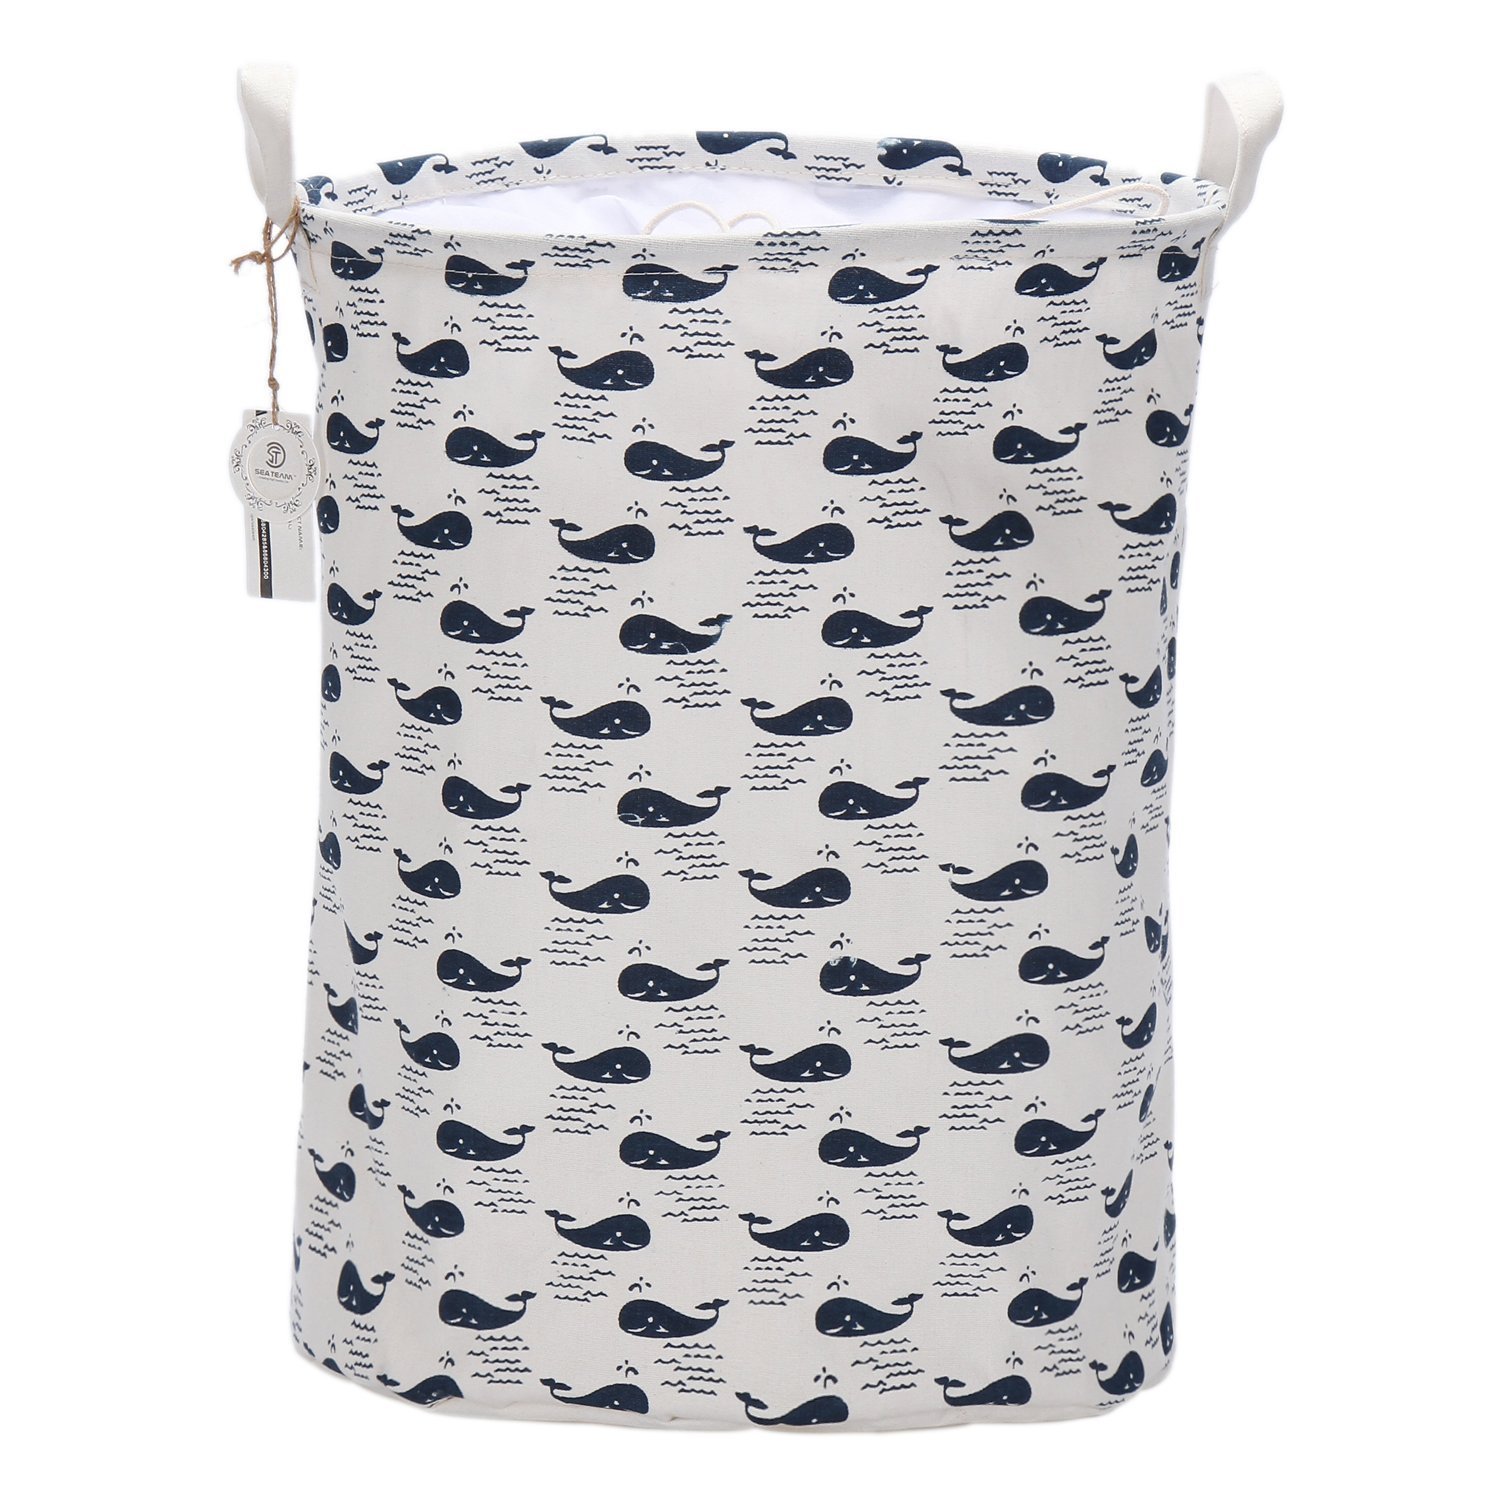 Sea Team Folding Cylindric Canvas Fabric Laundry Hamper Storage Basket with Drawstring Cover, best laundry hampers for nursery, laundry hampers for nursery, canvas laundry hamper, kids laundry hamper, baby laundry hamper, whales laundry hamper, cute laundry hamper, affordable laundry hamper, best nursery hampers, nursery hampers